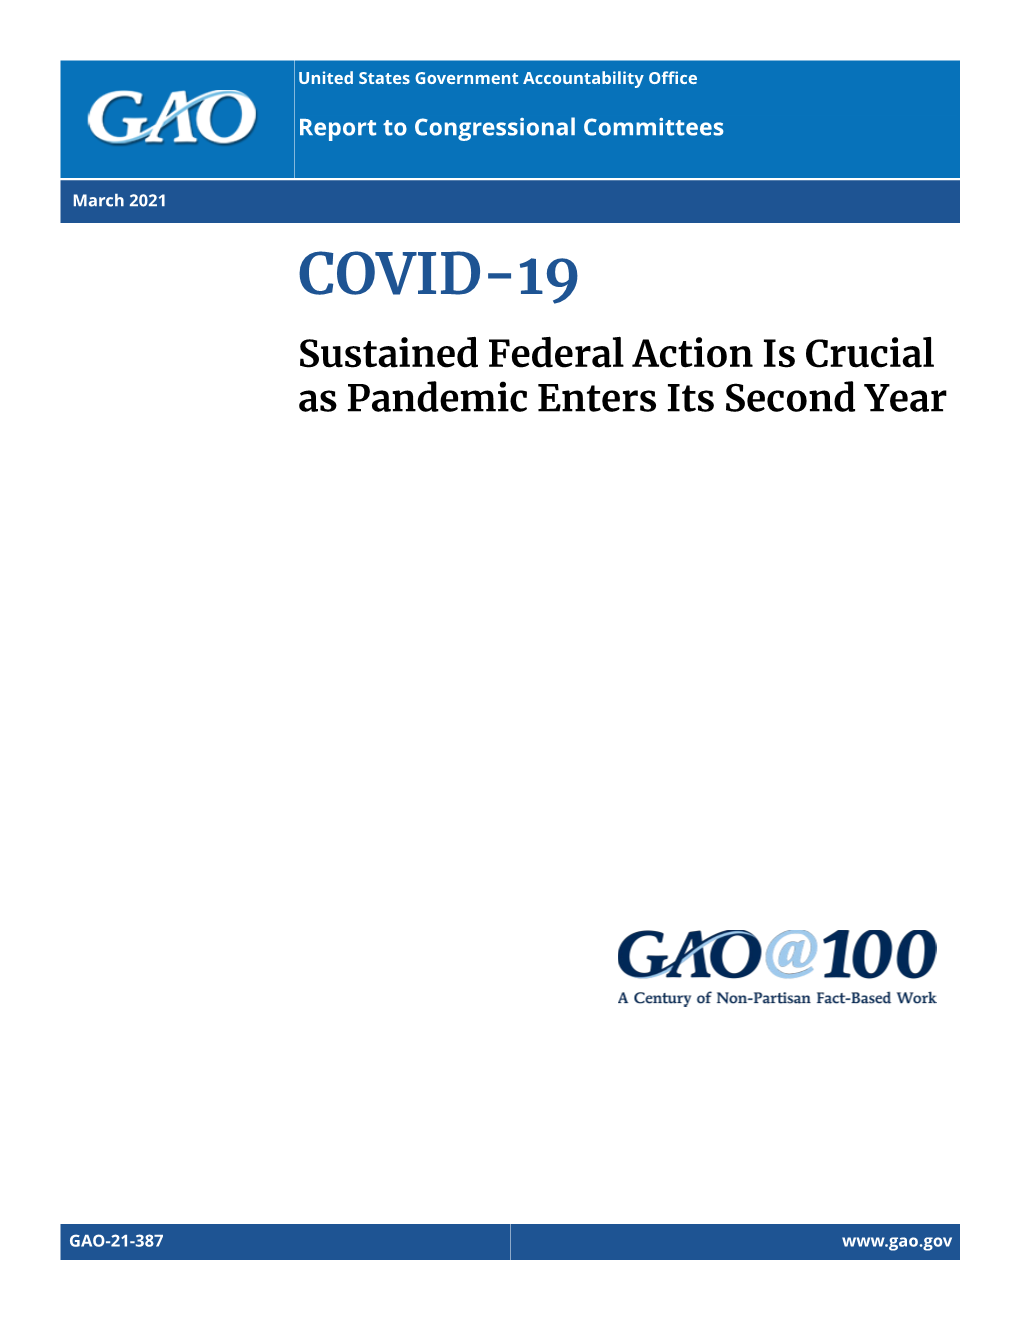 COVID-19 Sustained Federal Action Is Crucial As Pandemic Enters Its Second Year